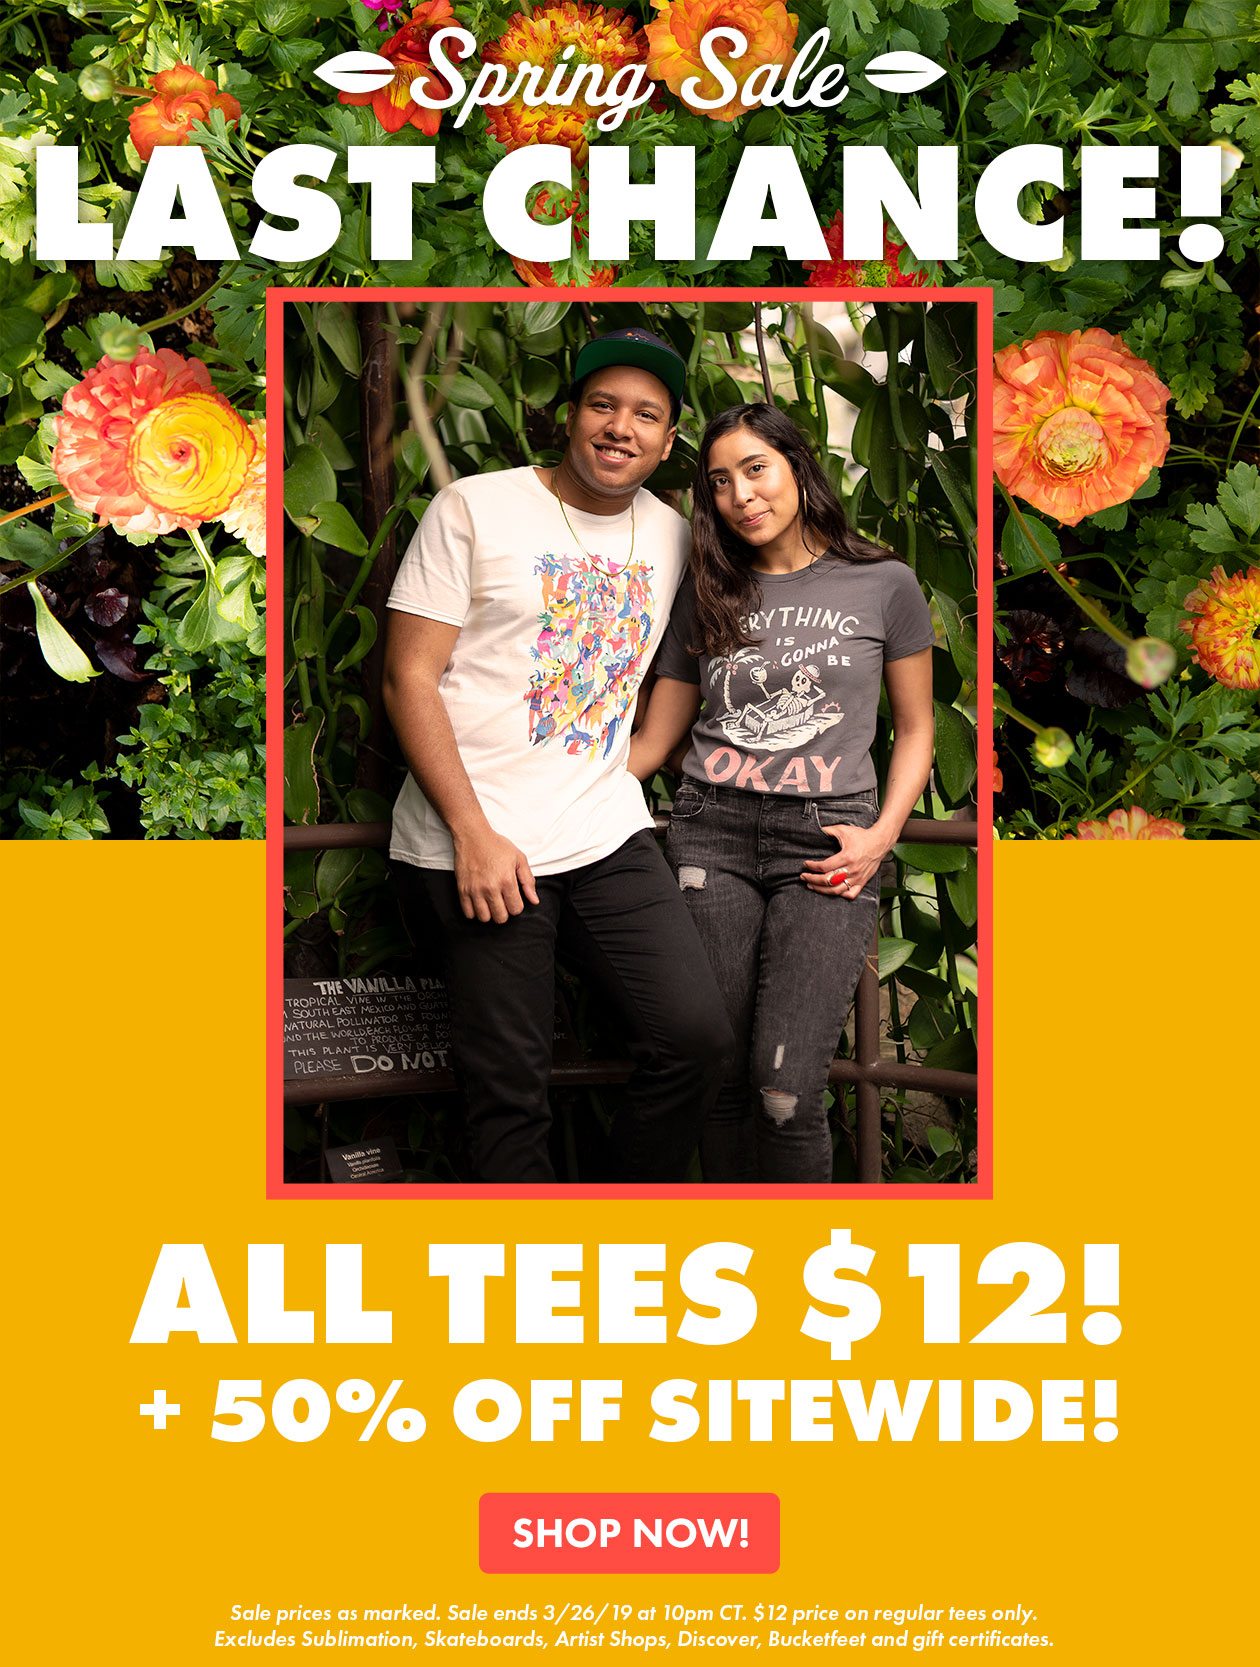 Last Chance for the Spring Sale!